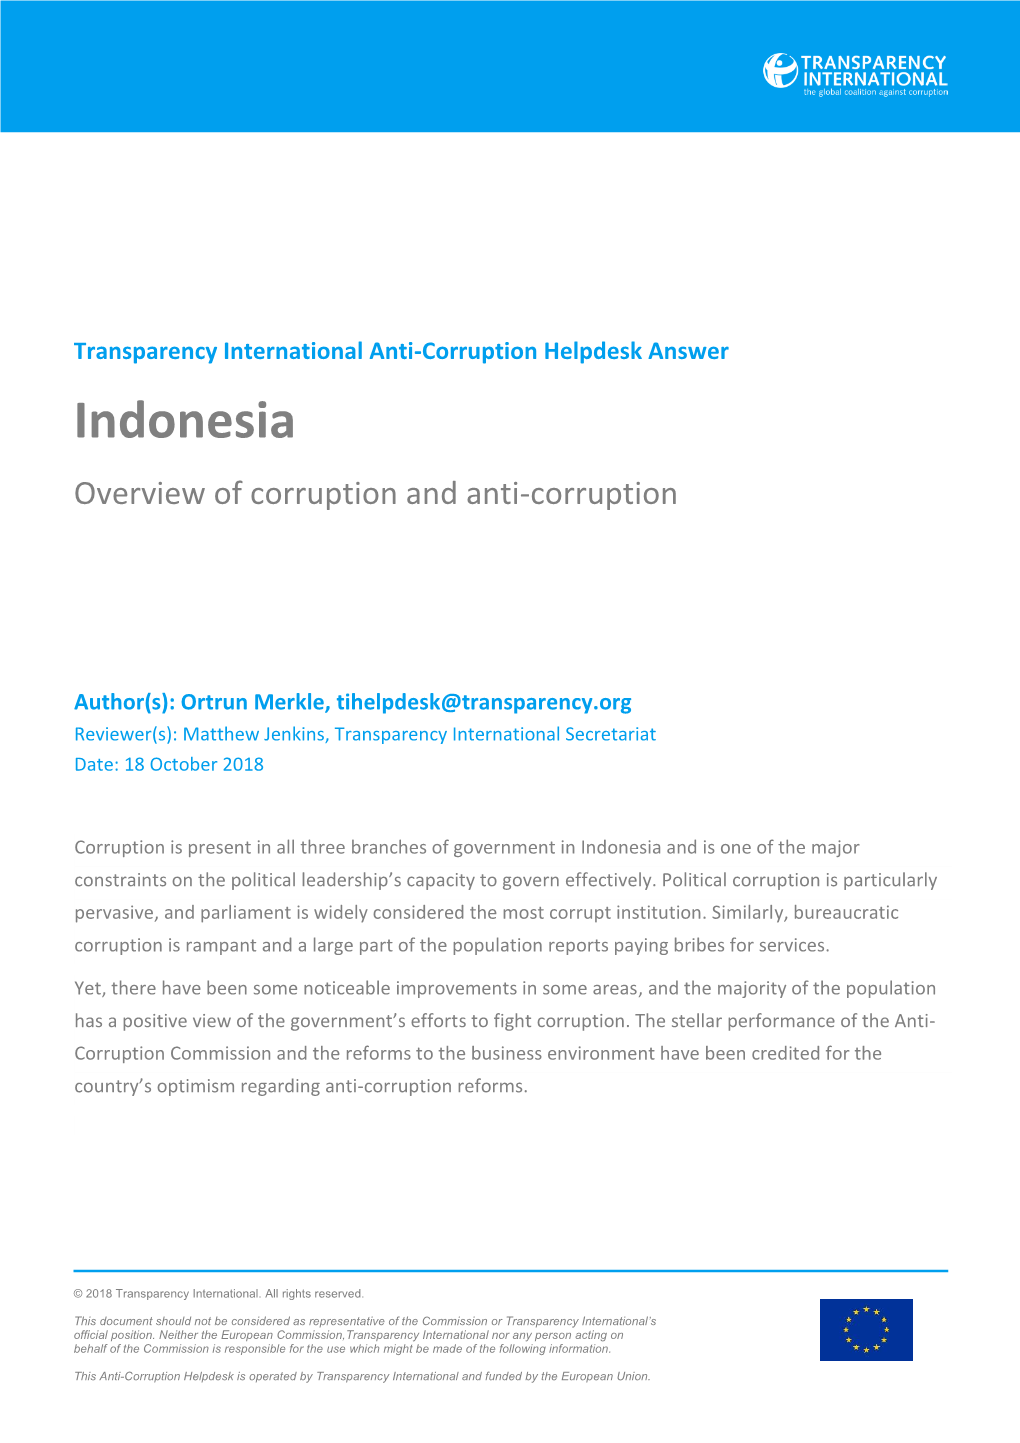 Indonesia Overview of Corruption and Anti-Corruption